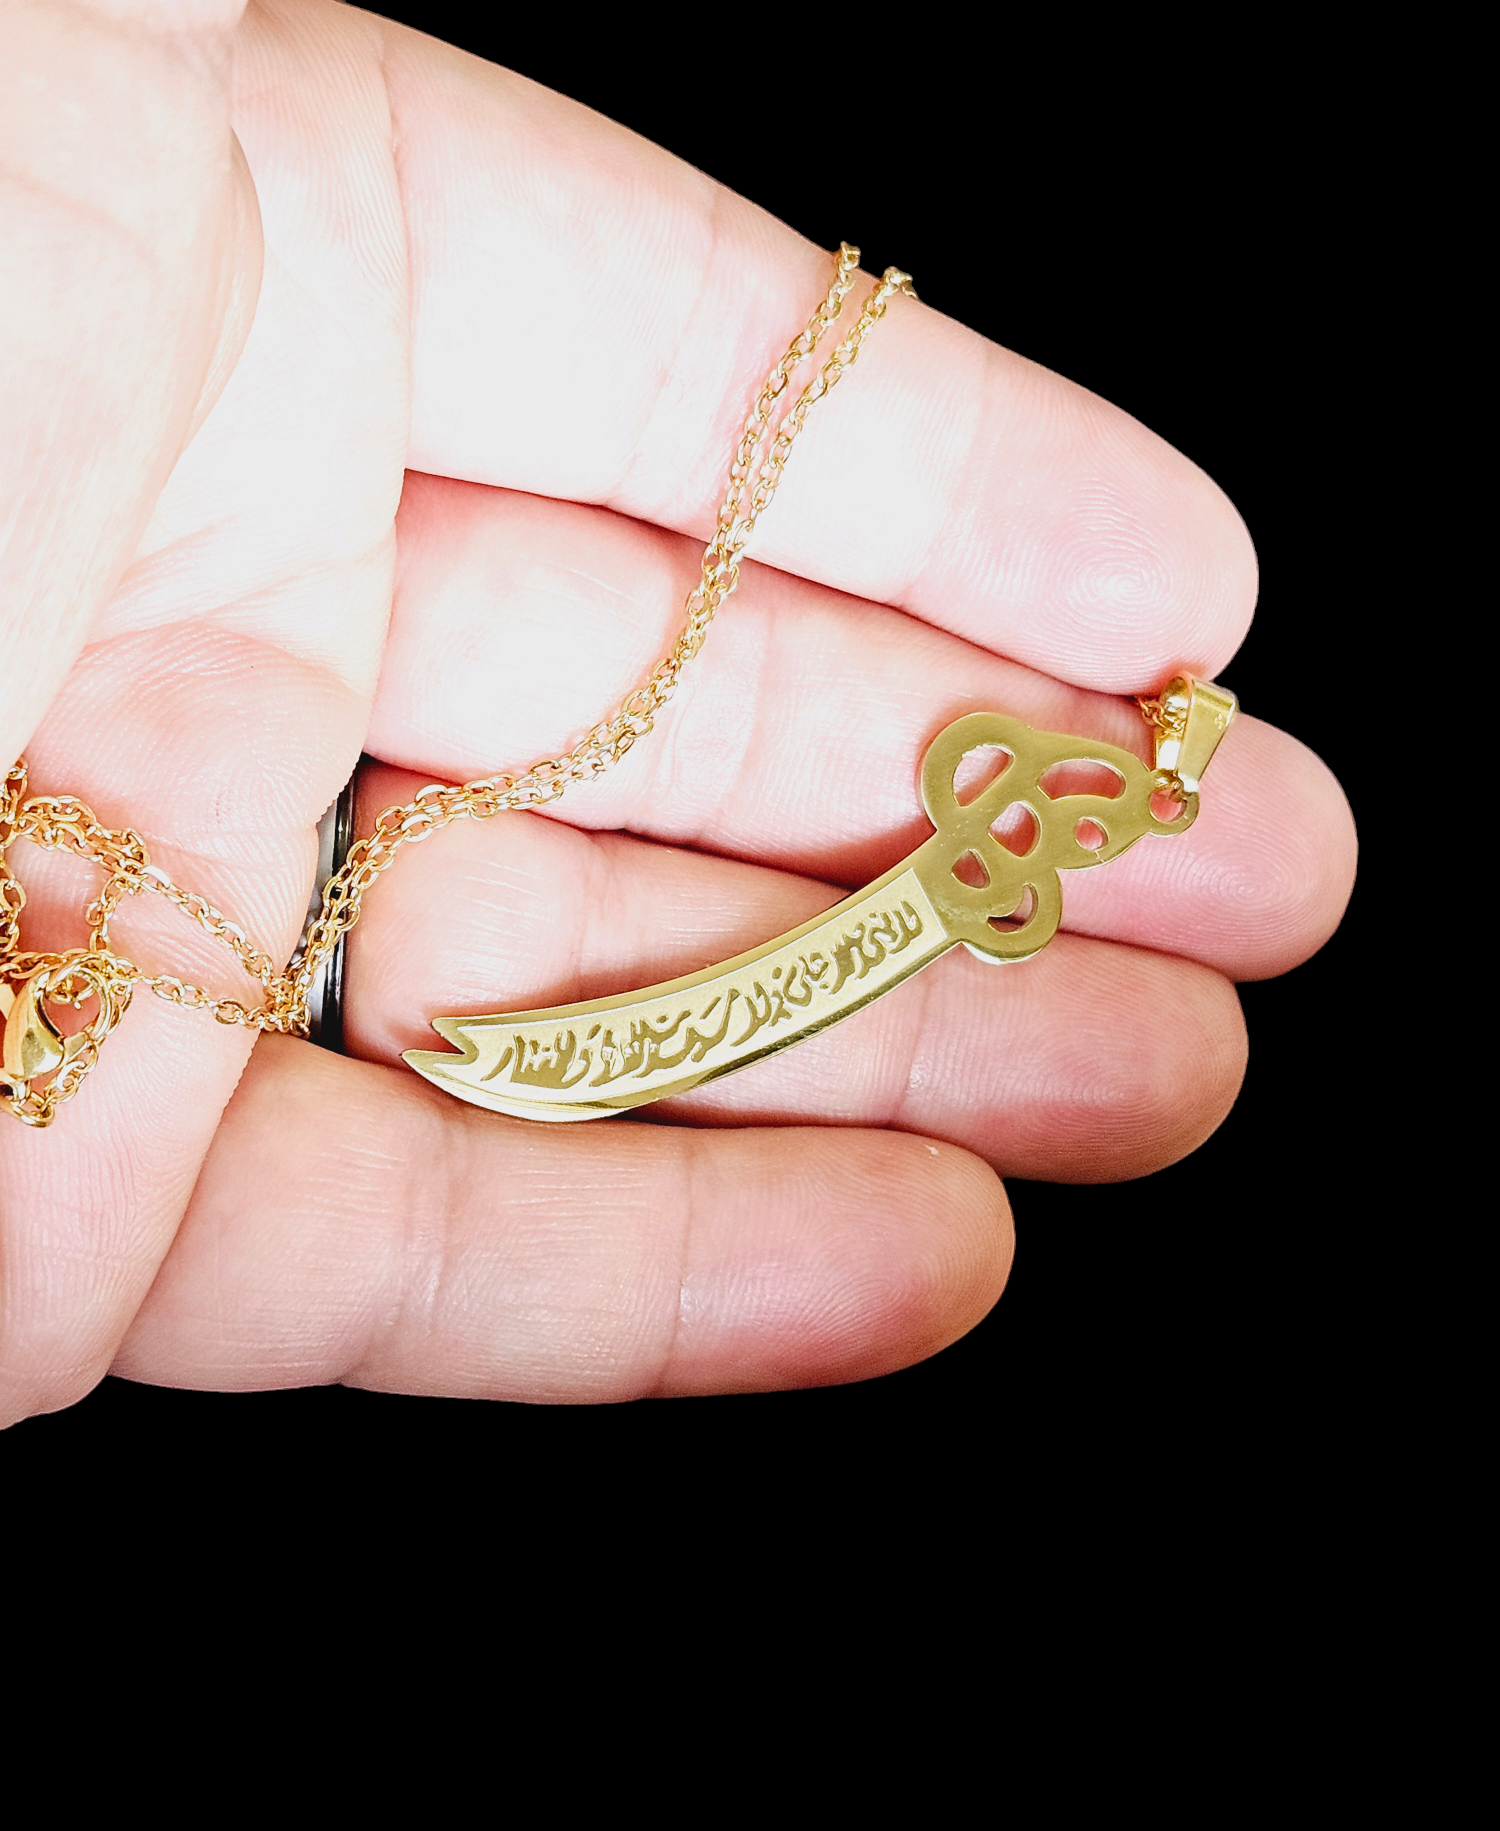 "There is no boy but Ali and no sword but Zulfiqar" Necklace - Habibi Heritage